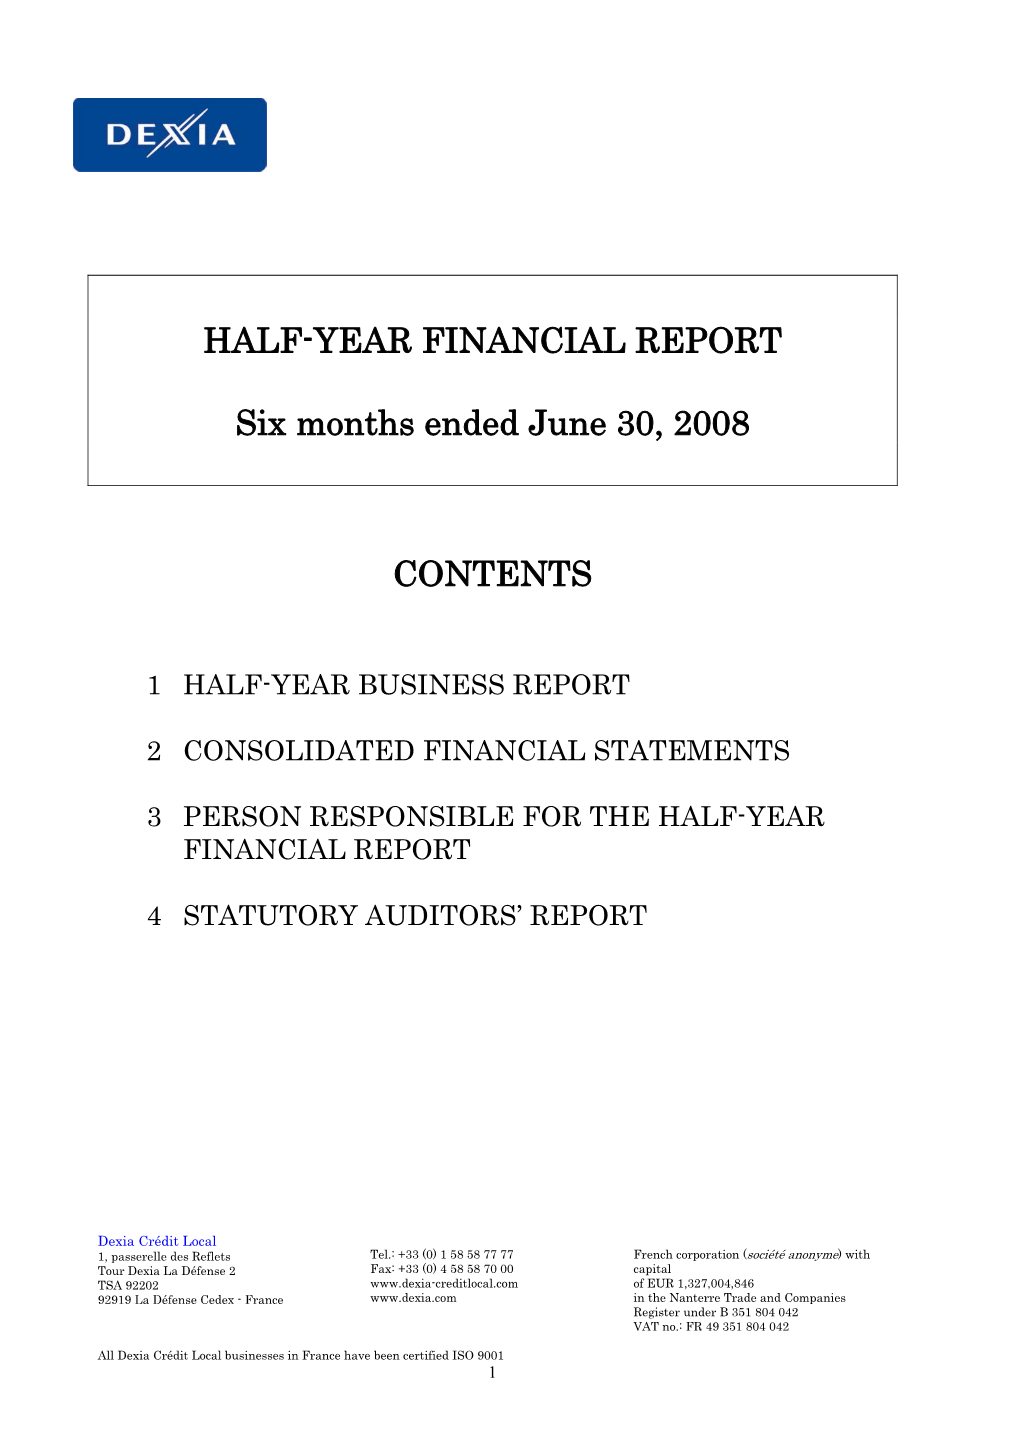 HALF-YEAR FINANCIAL REPORT Six Months Ended